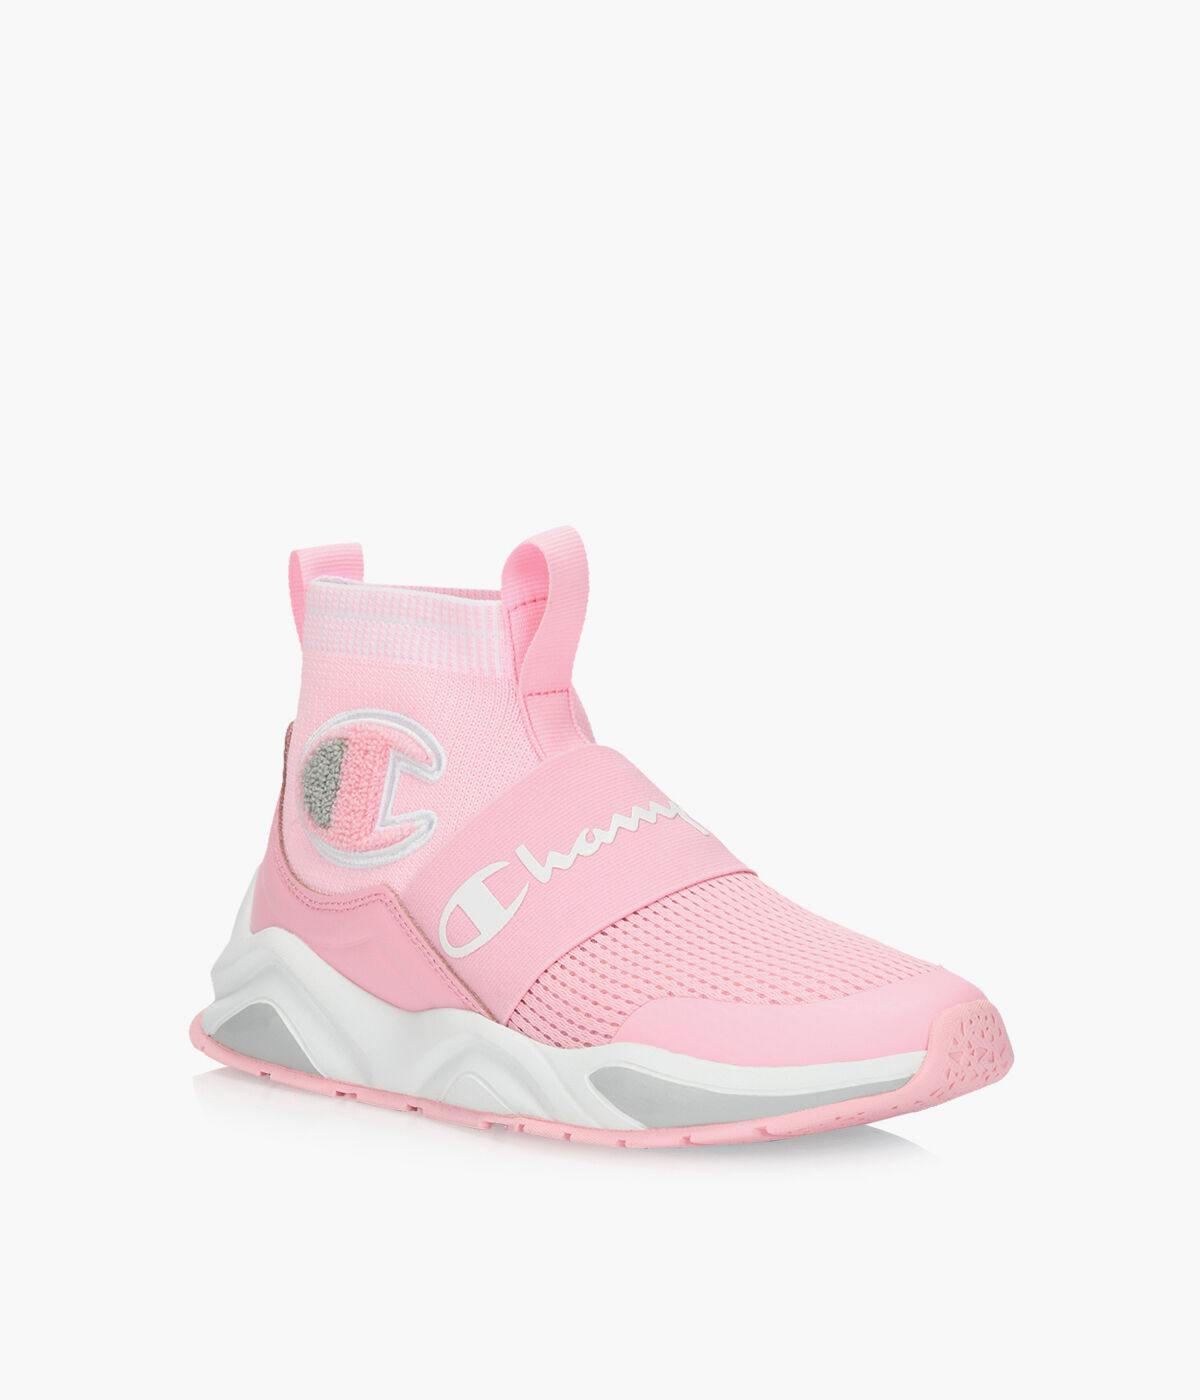 CHAMPION RALLY PRO - Pink | Browns Shoes